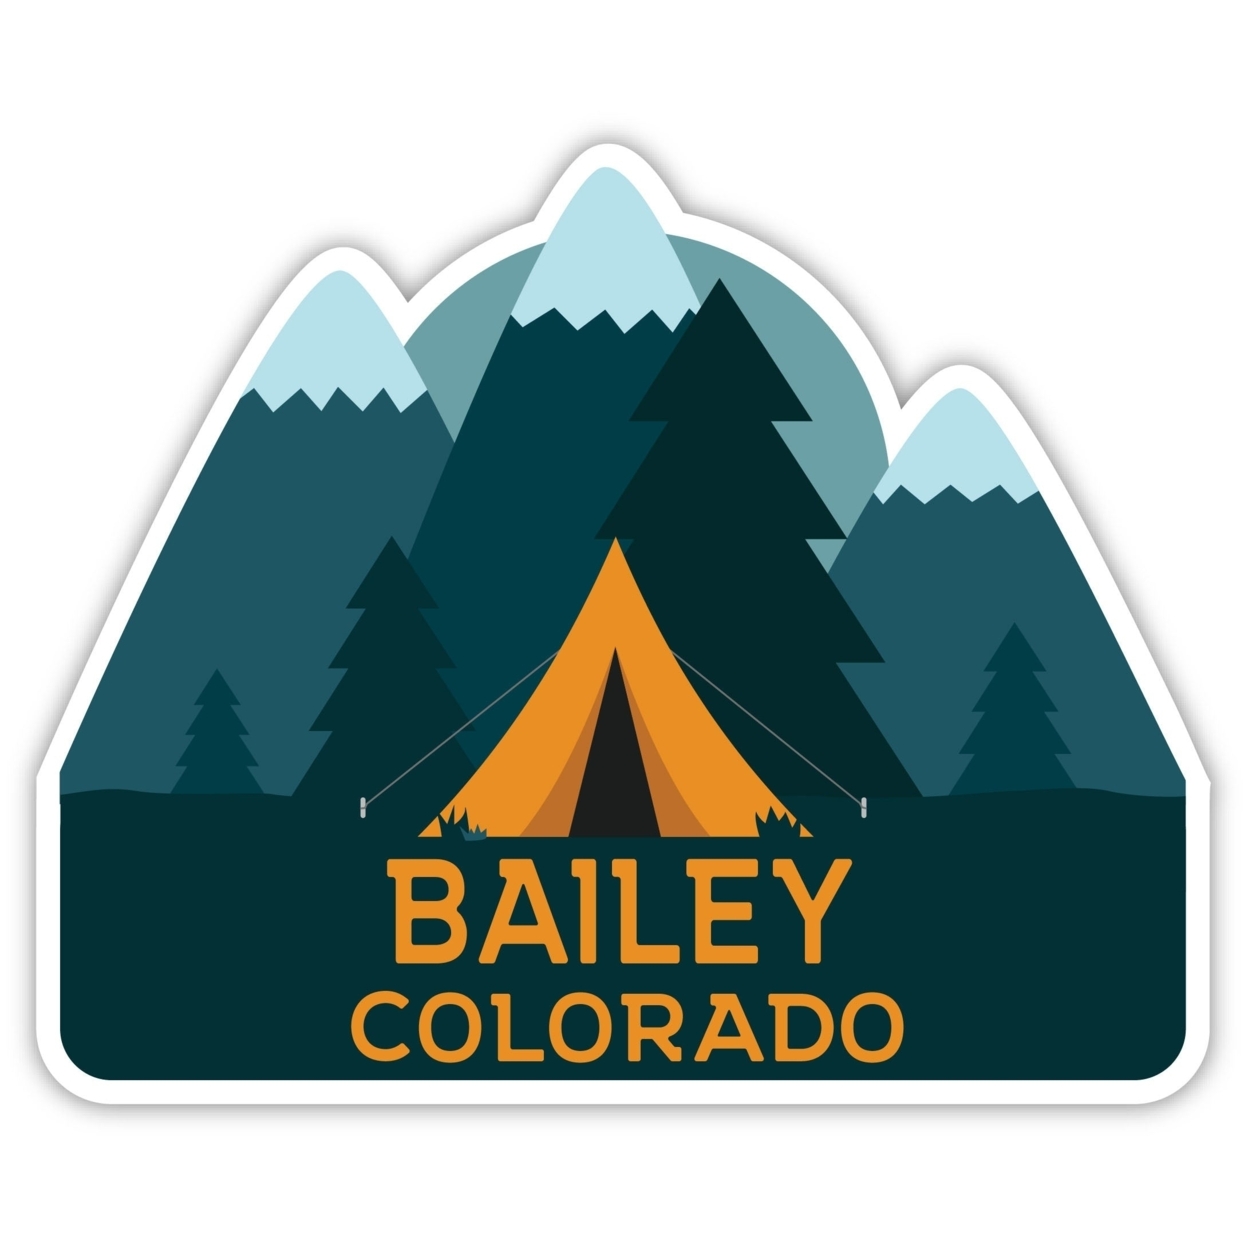 Bailey Colorado Souvenir Decorative Stickers (Choose Theme And Size) - 4-Pack, 4-Inch, Adventures Awaits